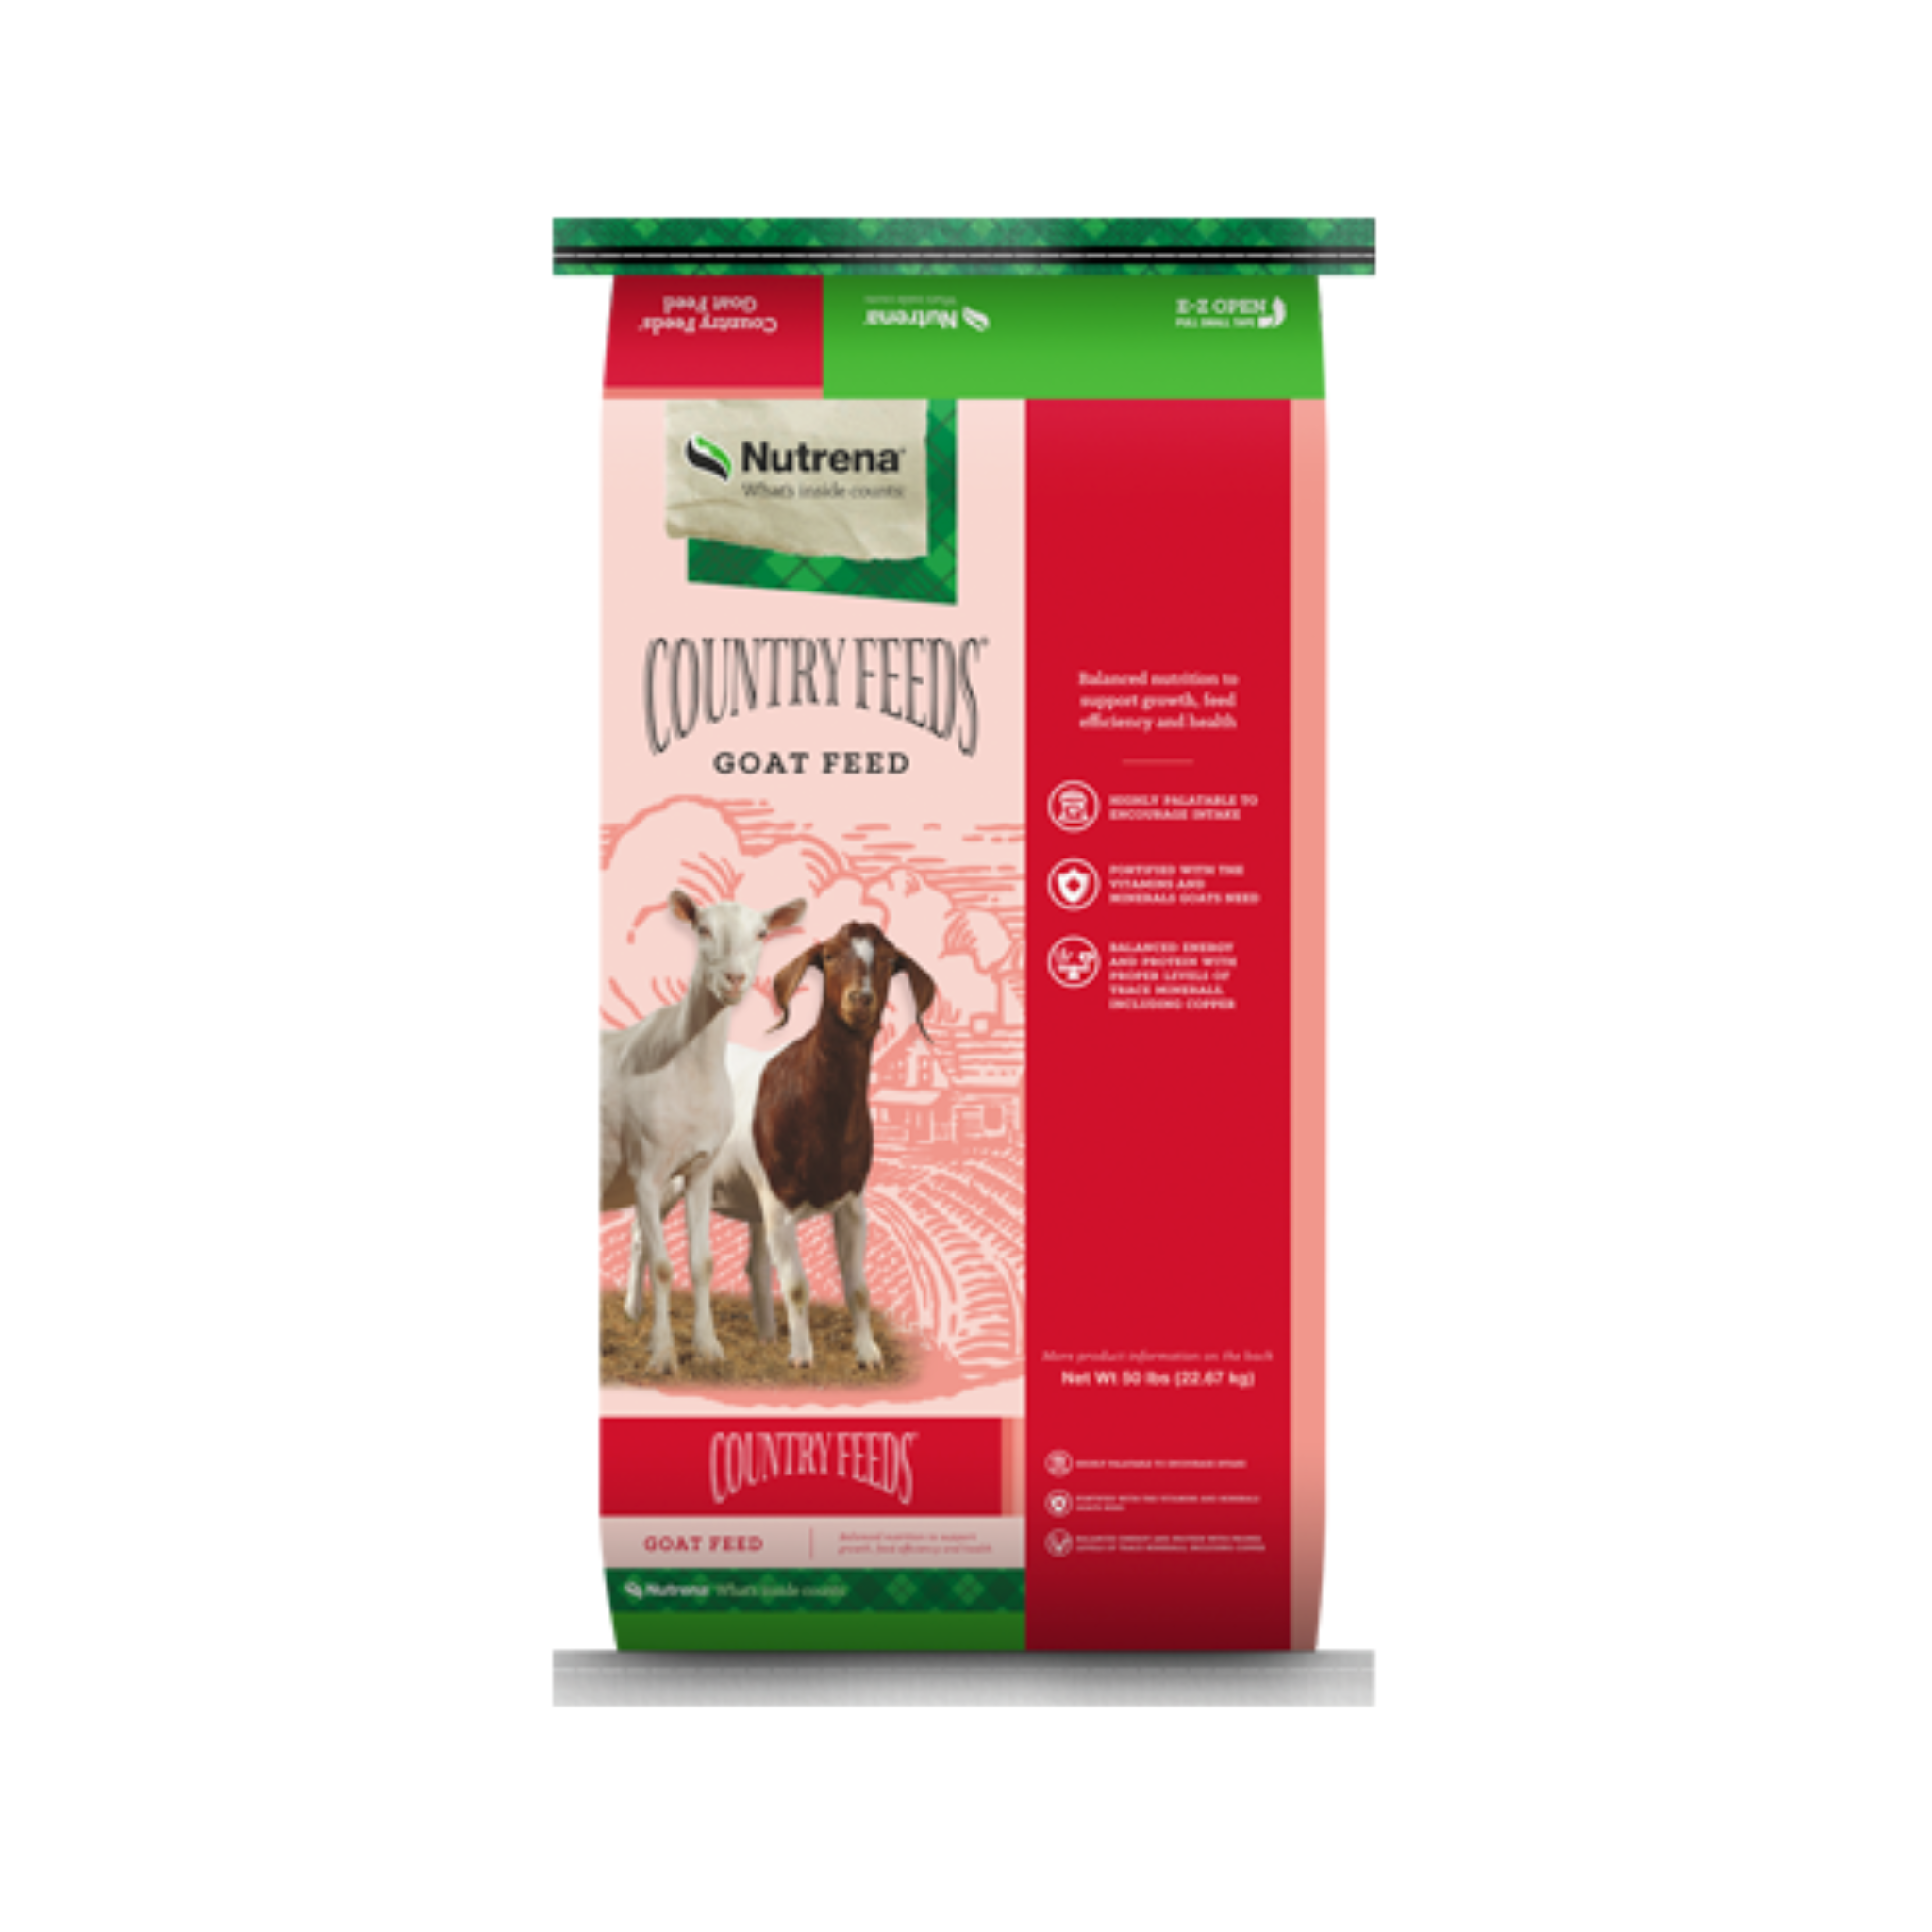 Nutrena Country Feeds 18% Pelleted Goat Feed